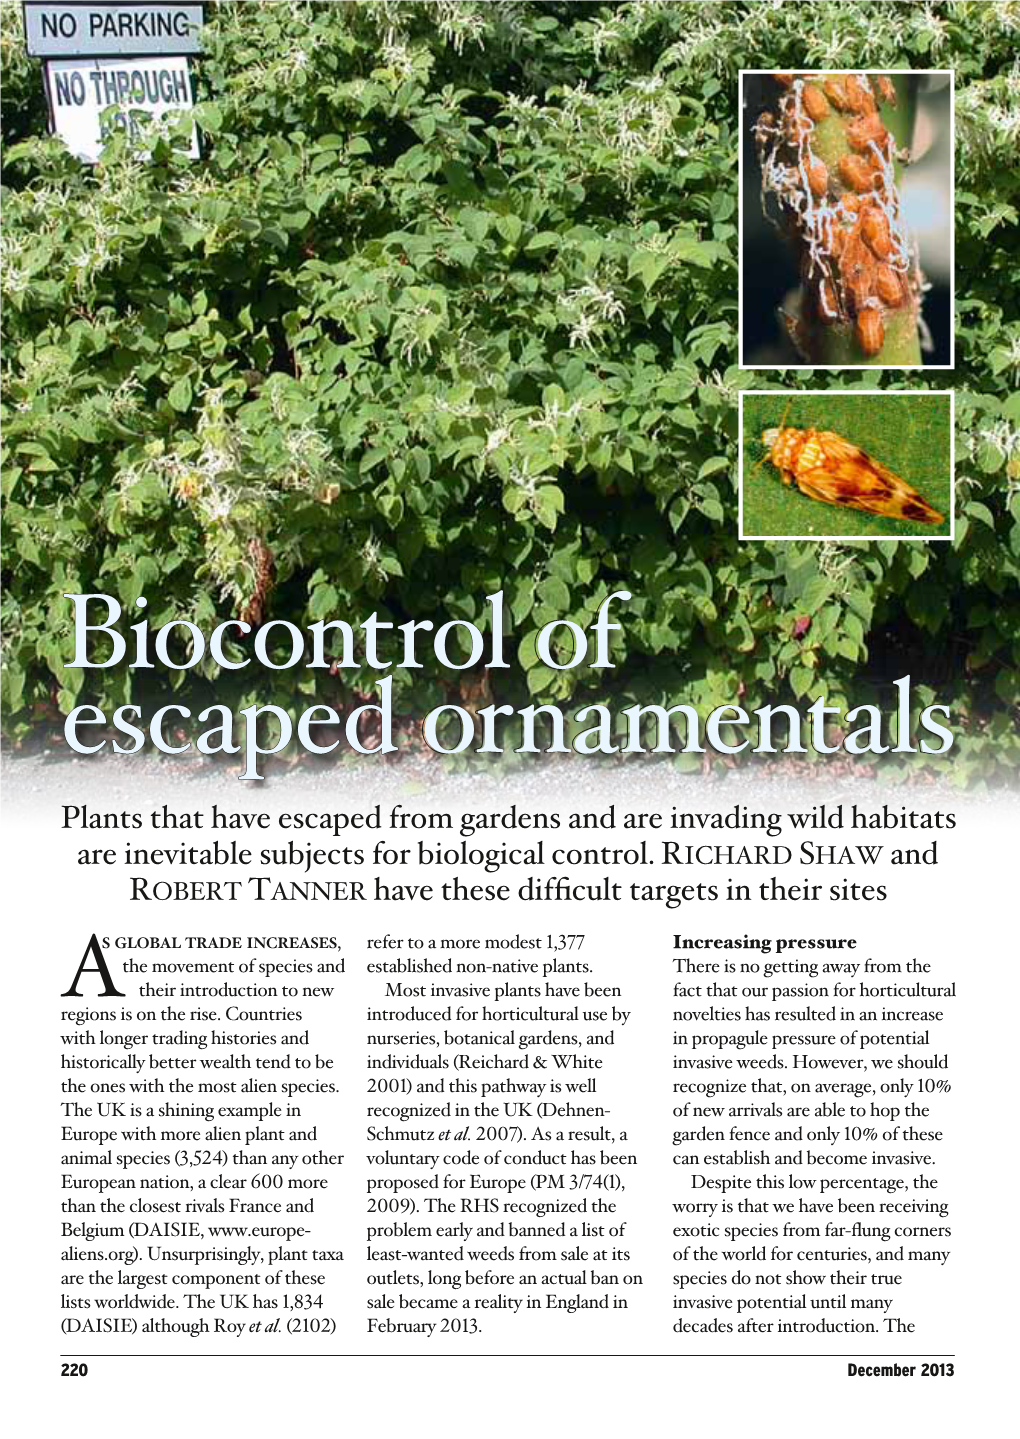 Biocontrol of Escaped Ornamentals Plants That Have Escaped from Gardens and Are Invading Wild Habitats Are Inevitable Subjects for Biological Control